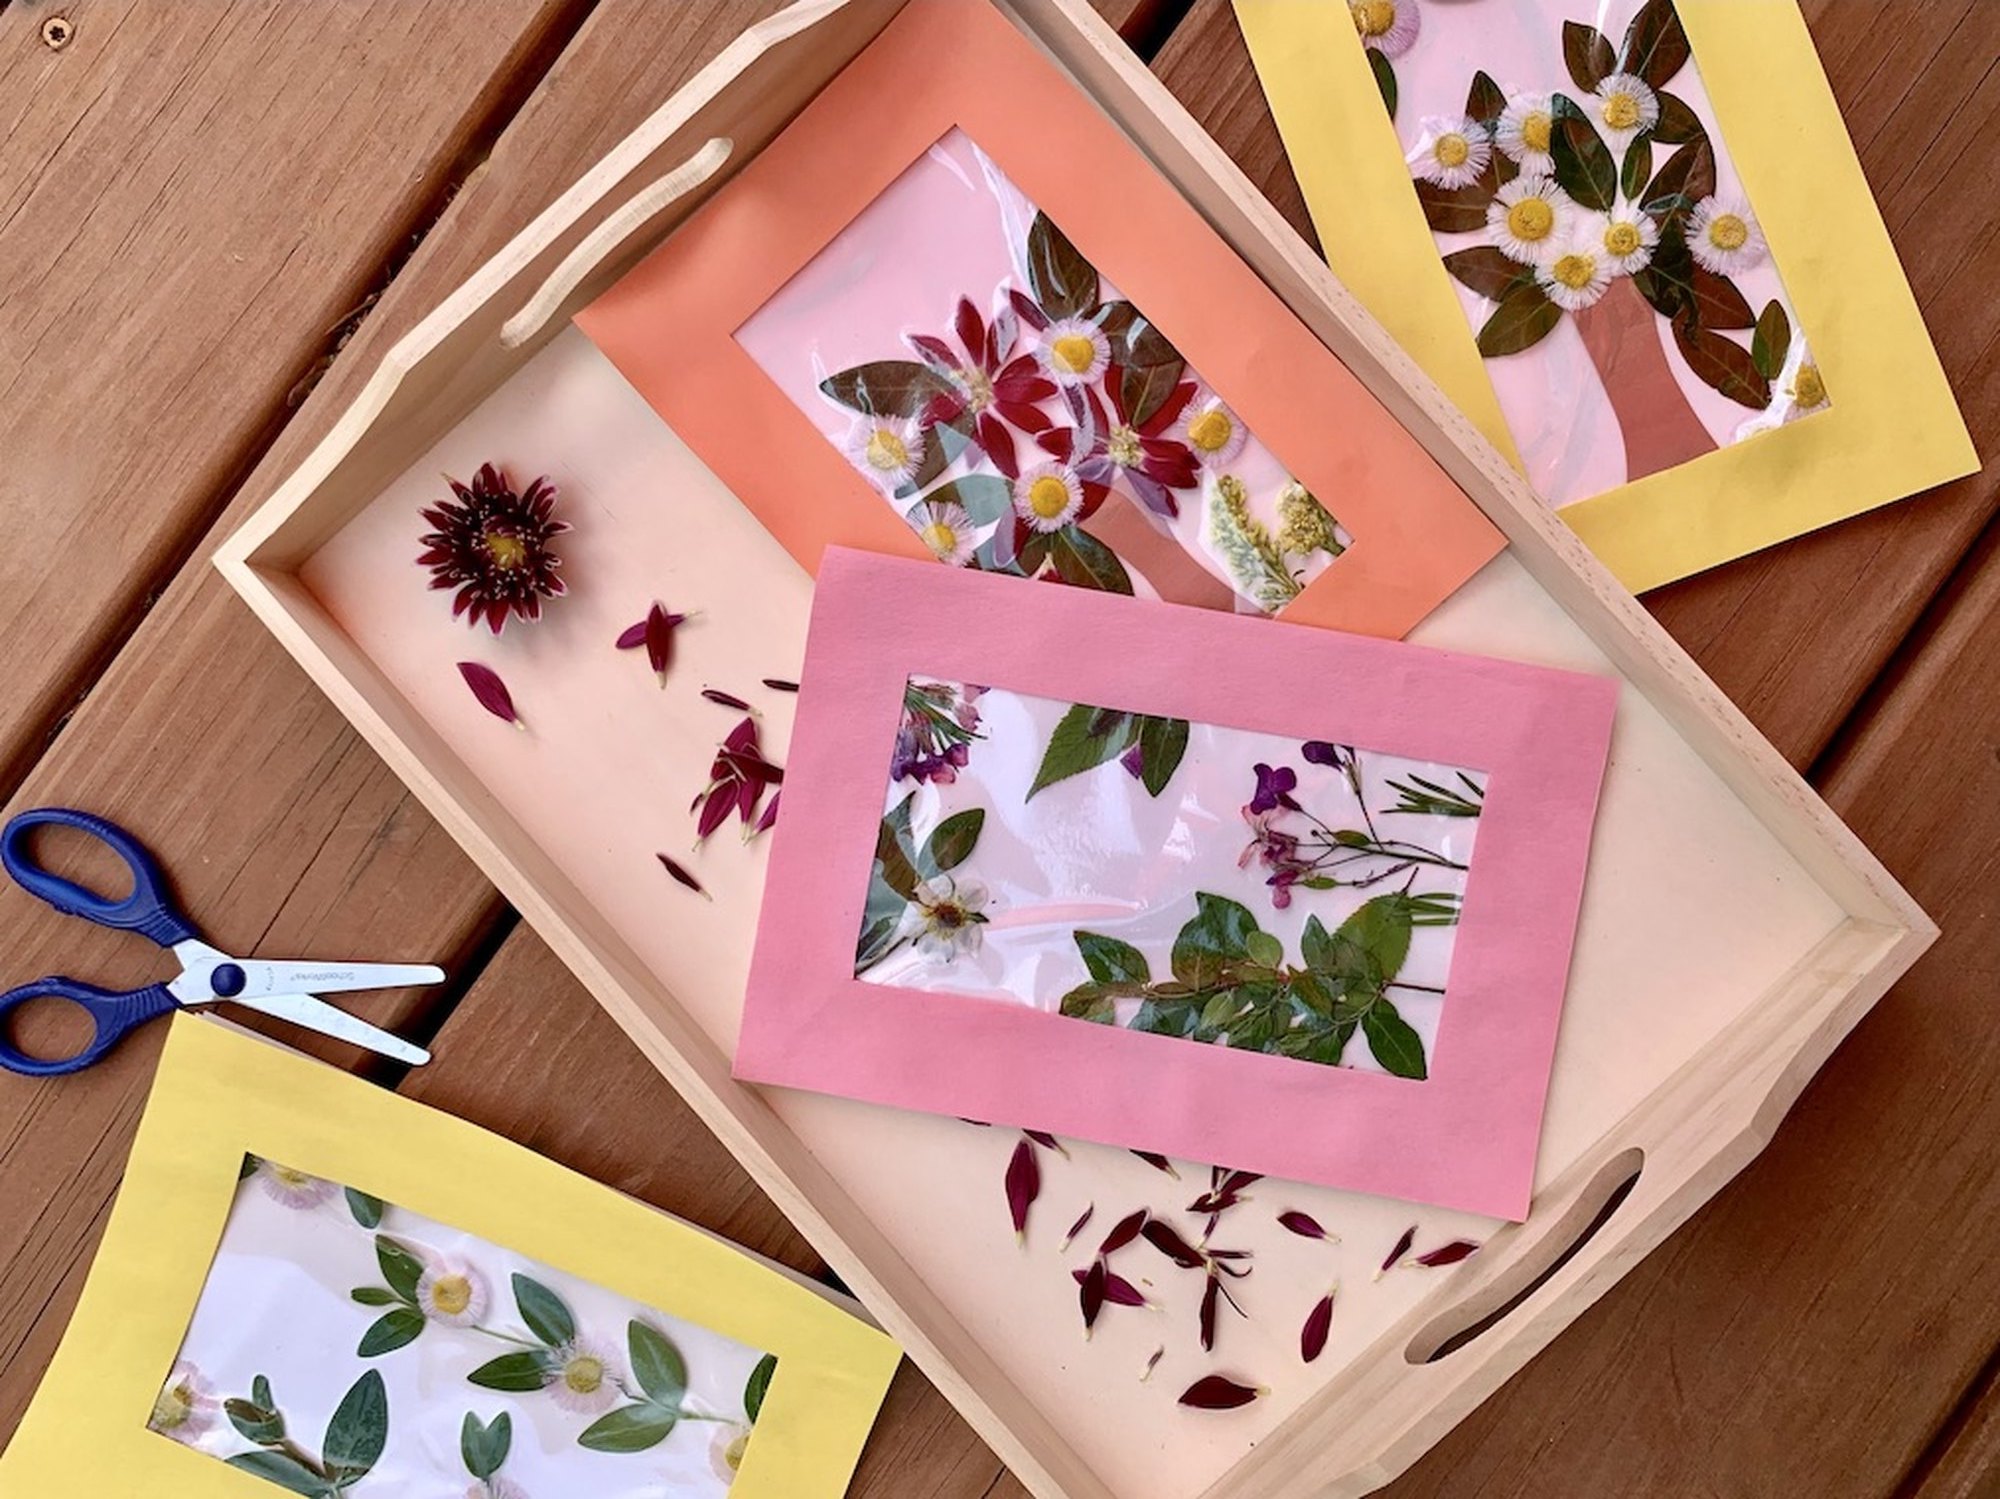 Let Your Creativity Bloom By Making an Origami Flower